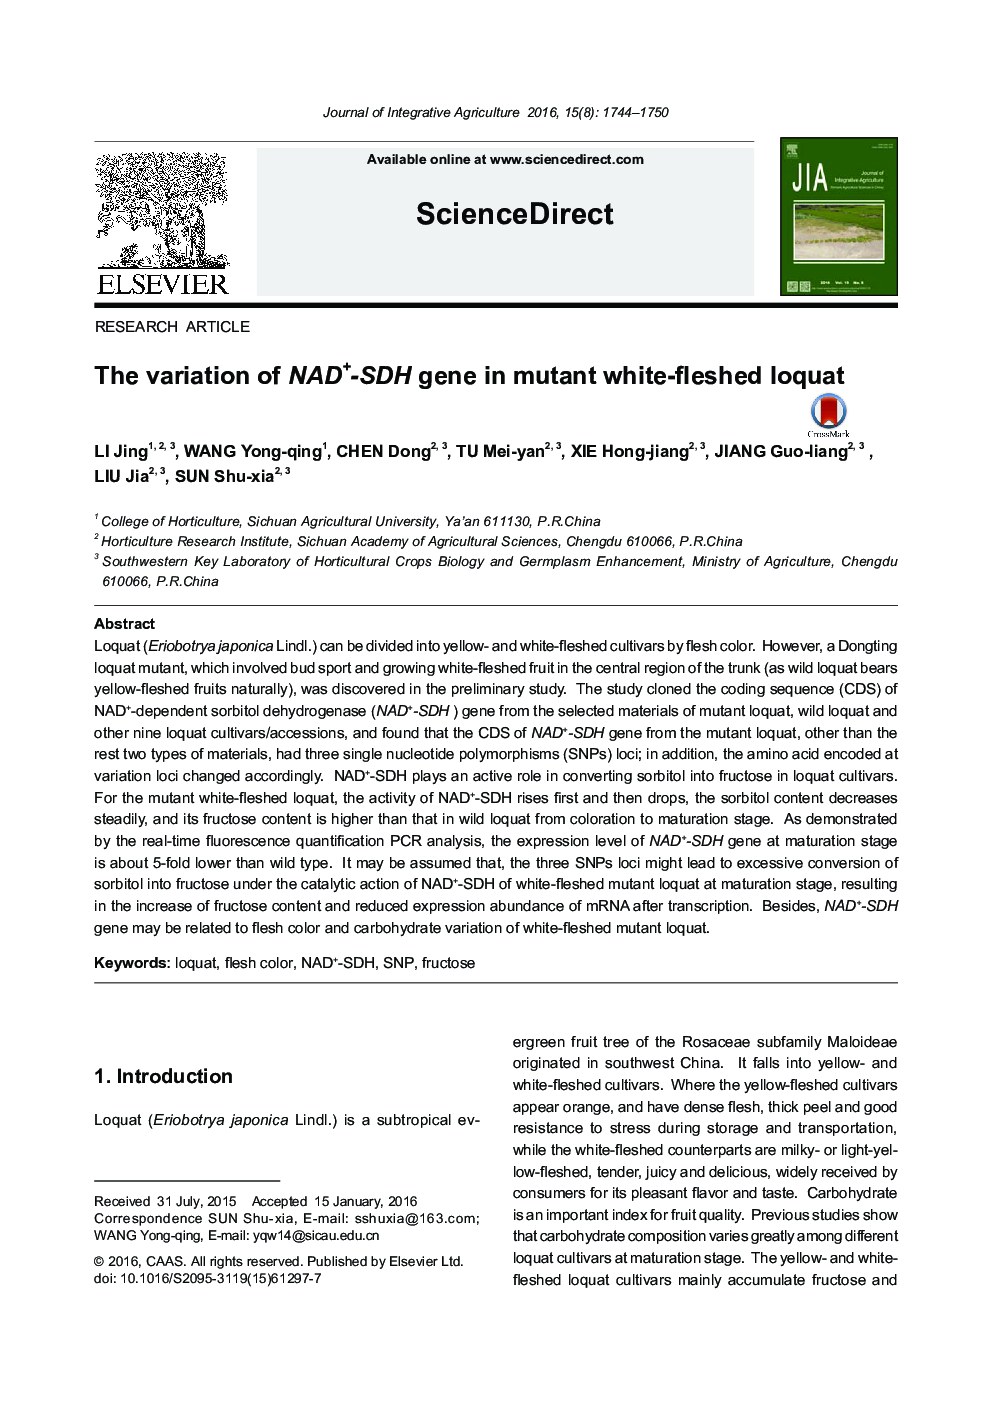 The variation of NAD+-SDH gene in mutant white-fleshed loquat